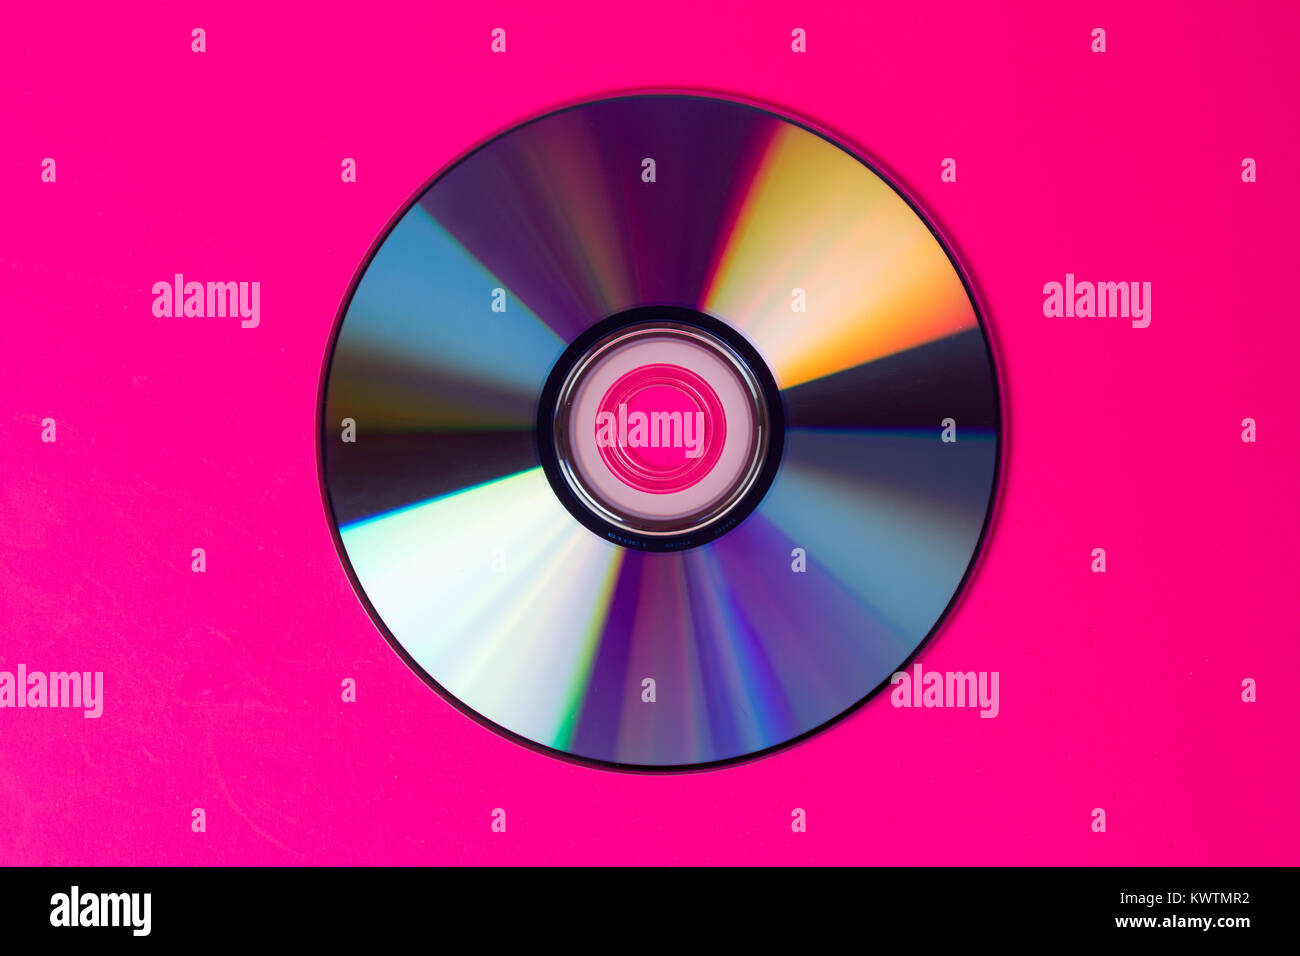 Photograph of a CD (compact Disc) in a pink background Stock Photo